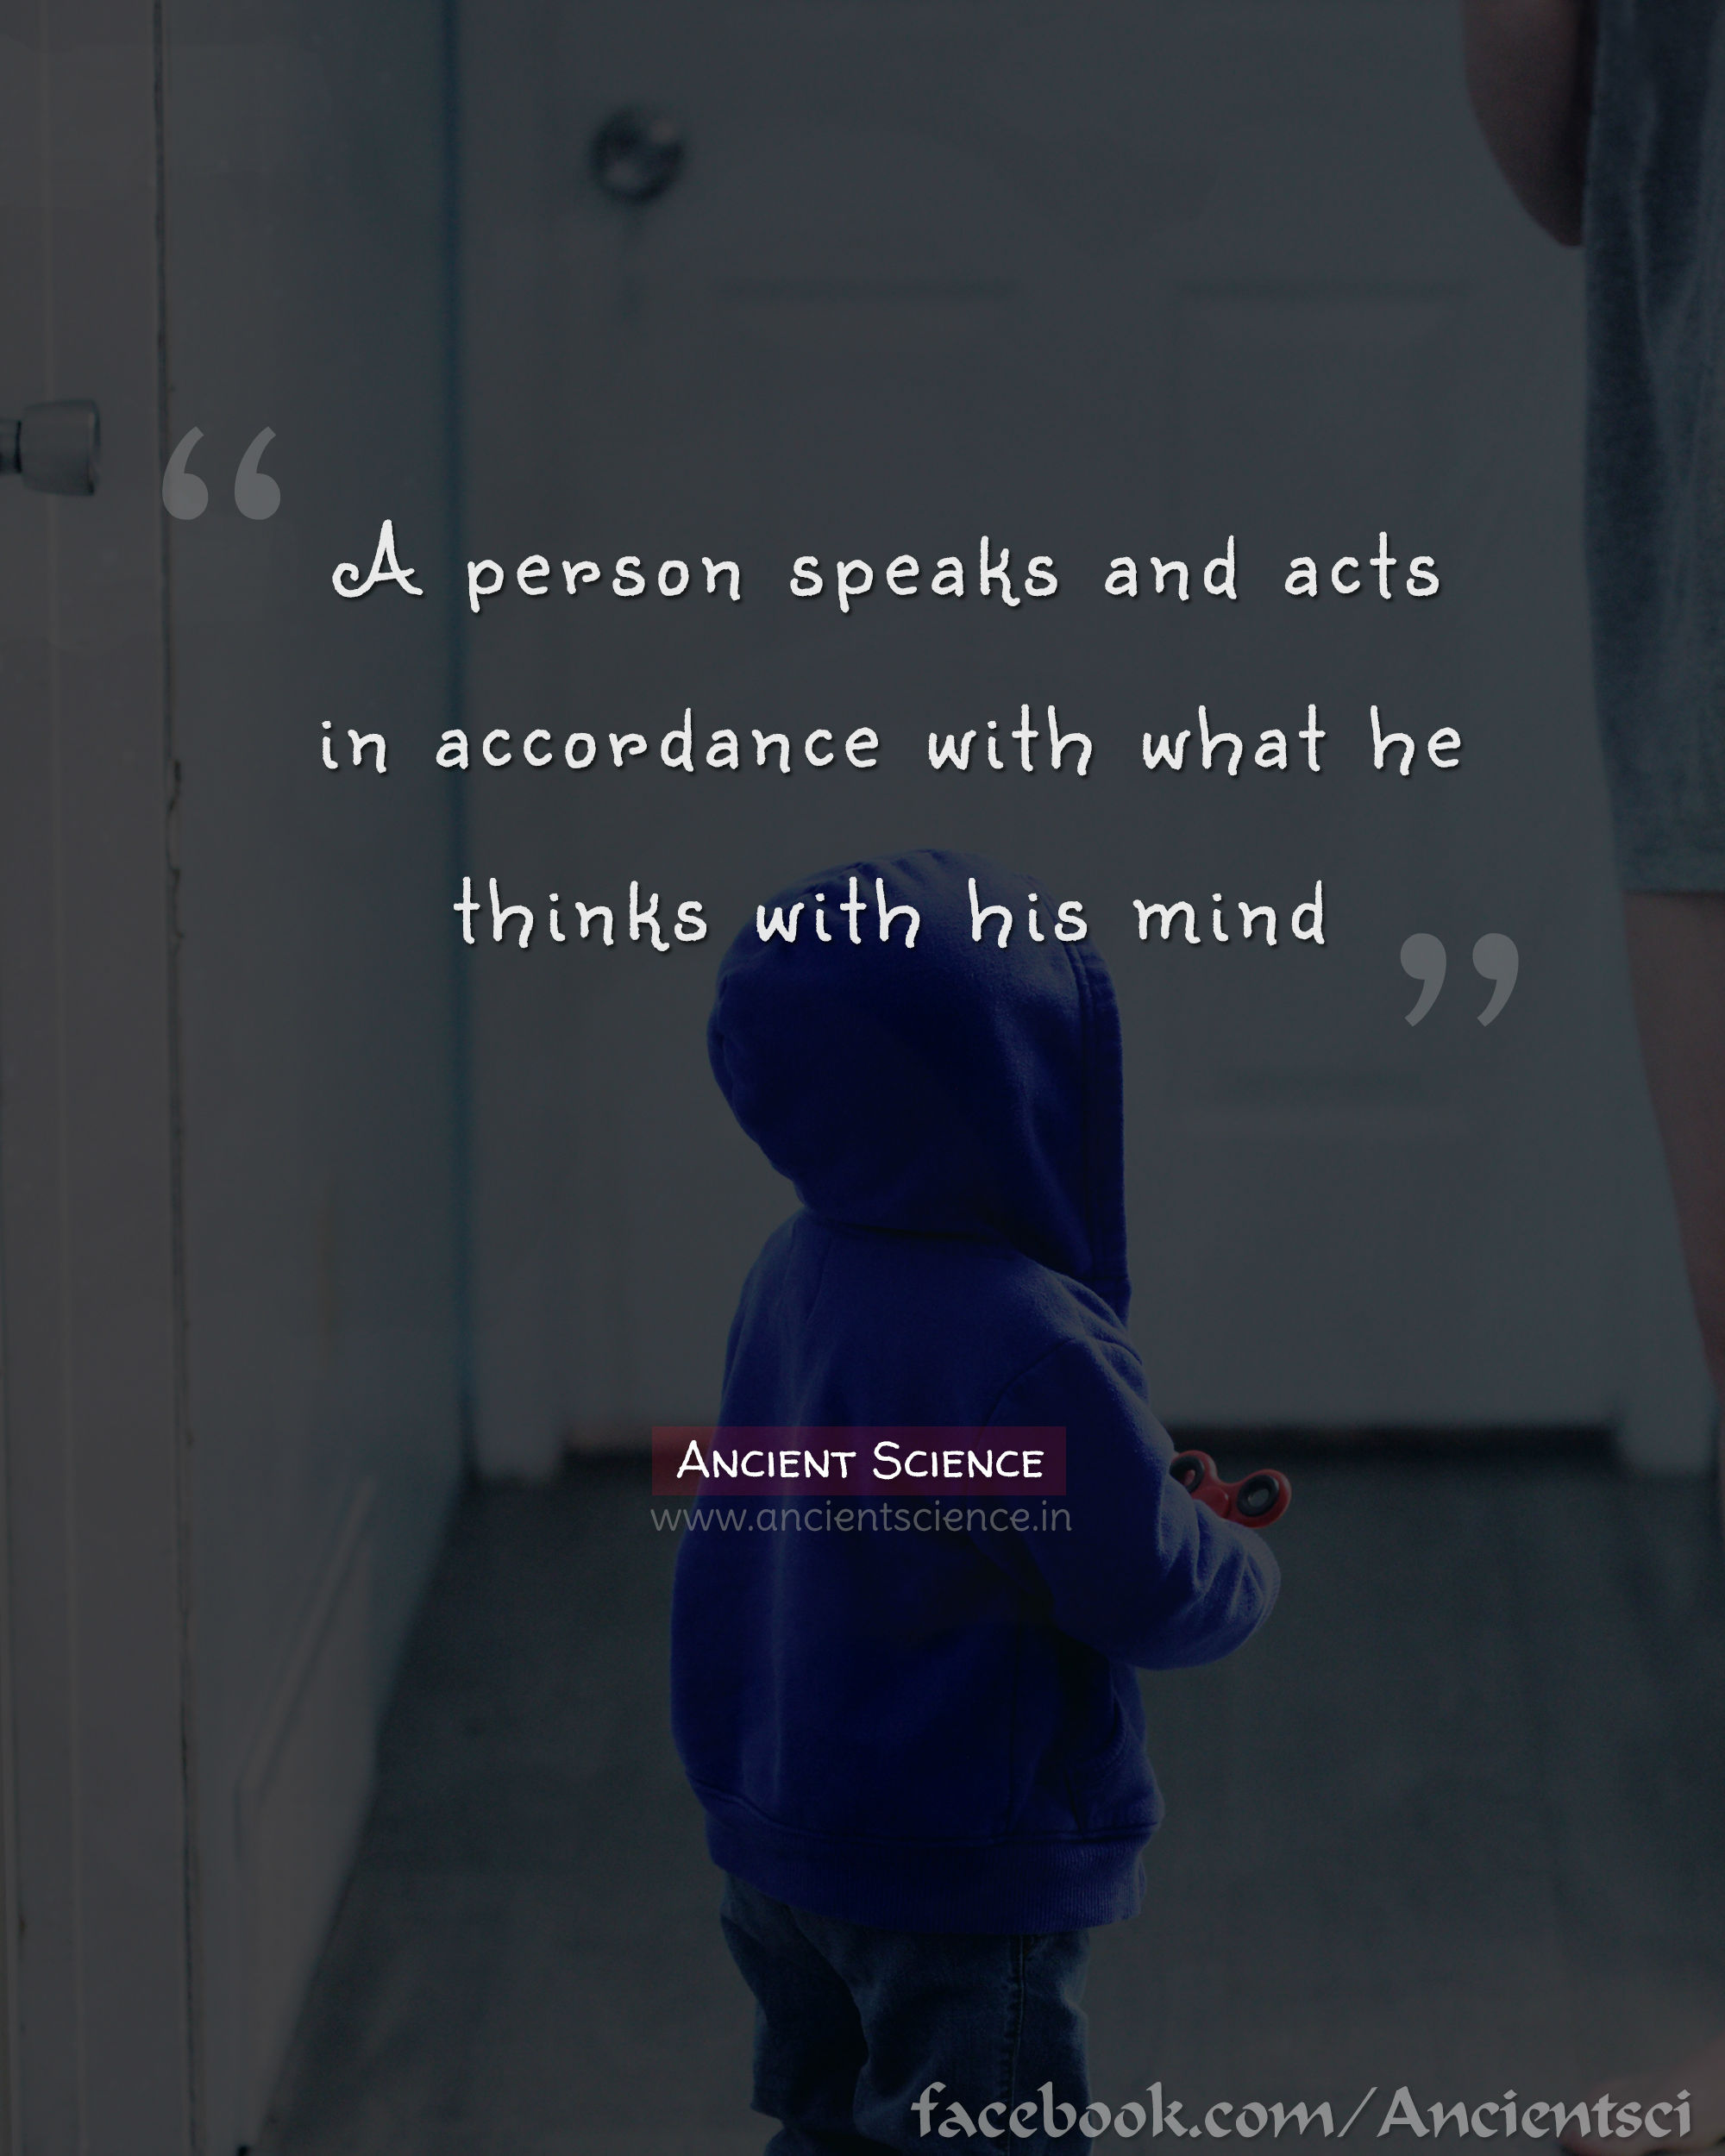 A person speaks and acts in accordance with what he thinks with his mind.